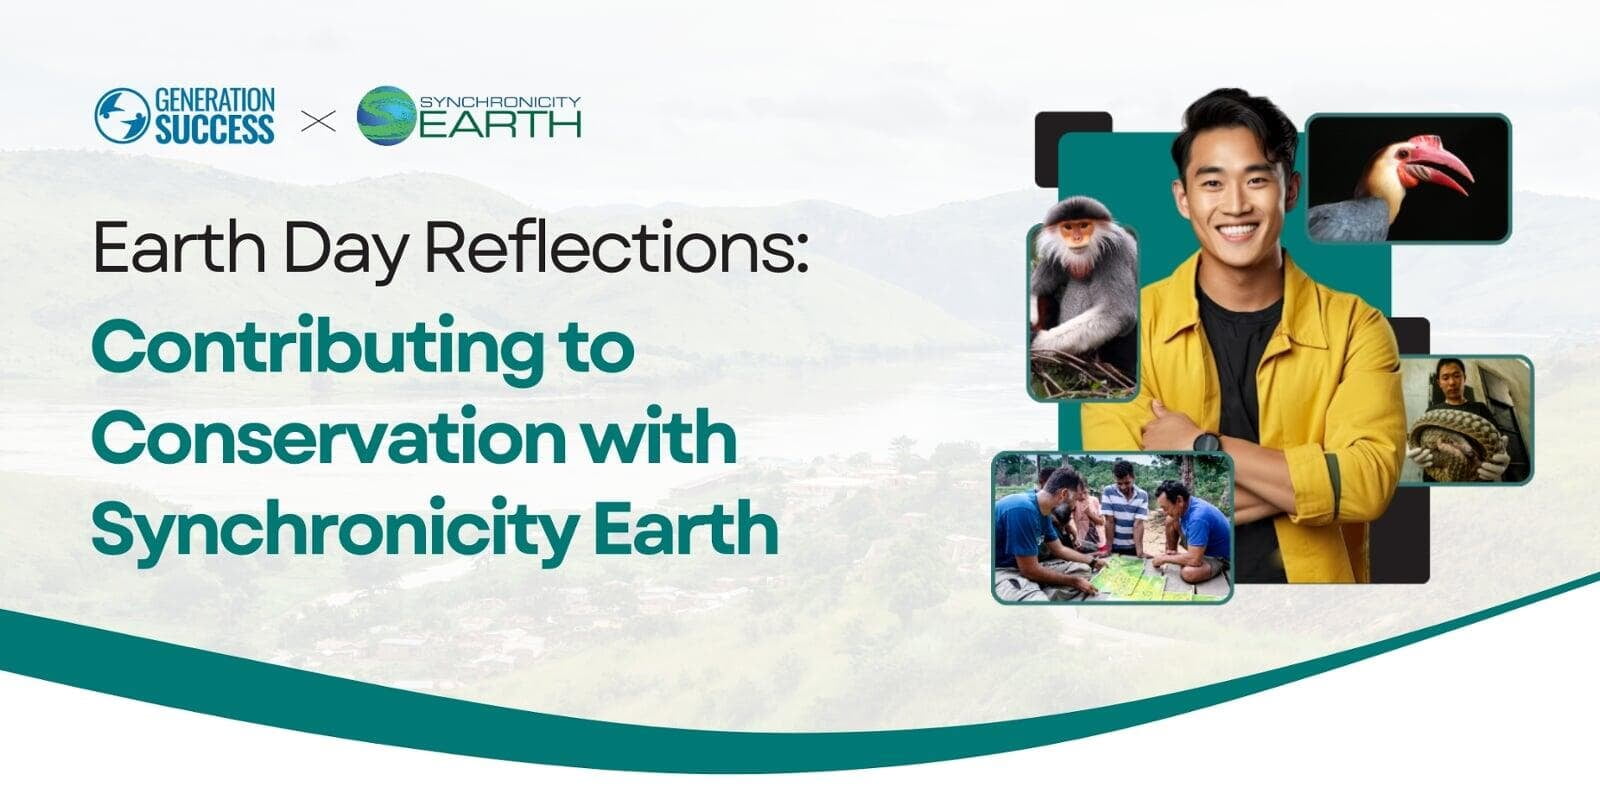 Earth Day Reflections: Contributing to Conservation with Synchronicity Earth